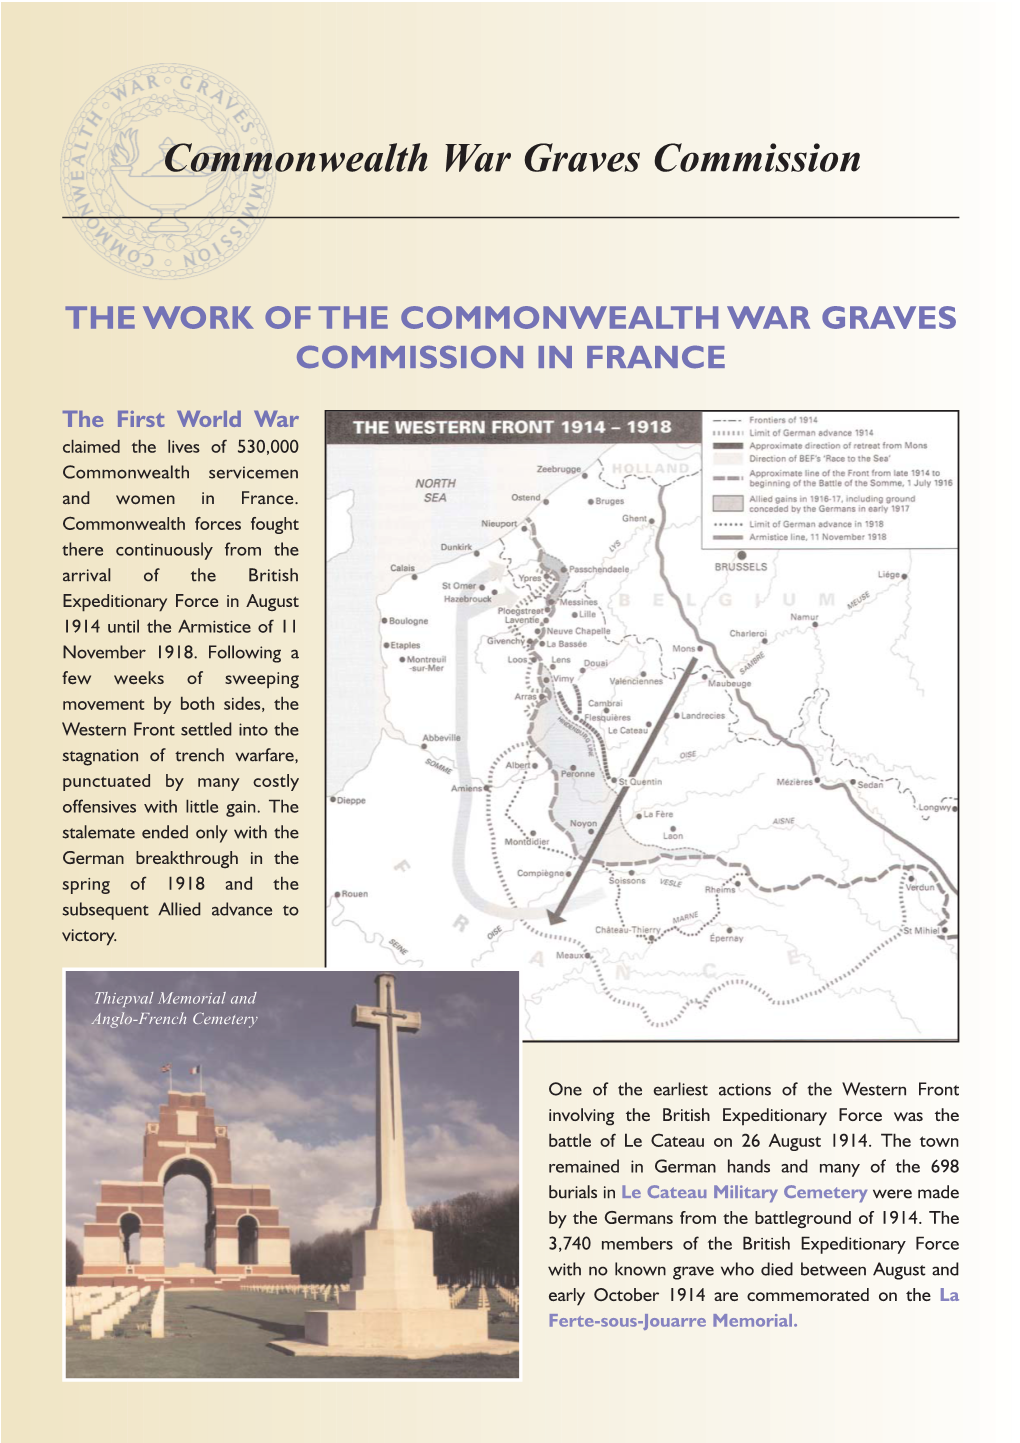 Commonwealth War Graves Commission: France